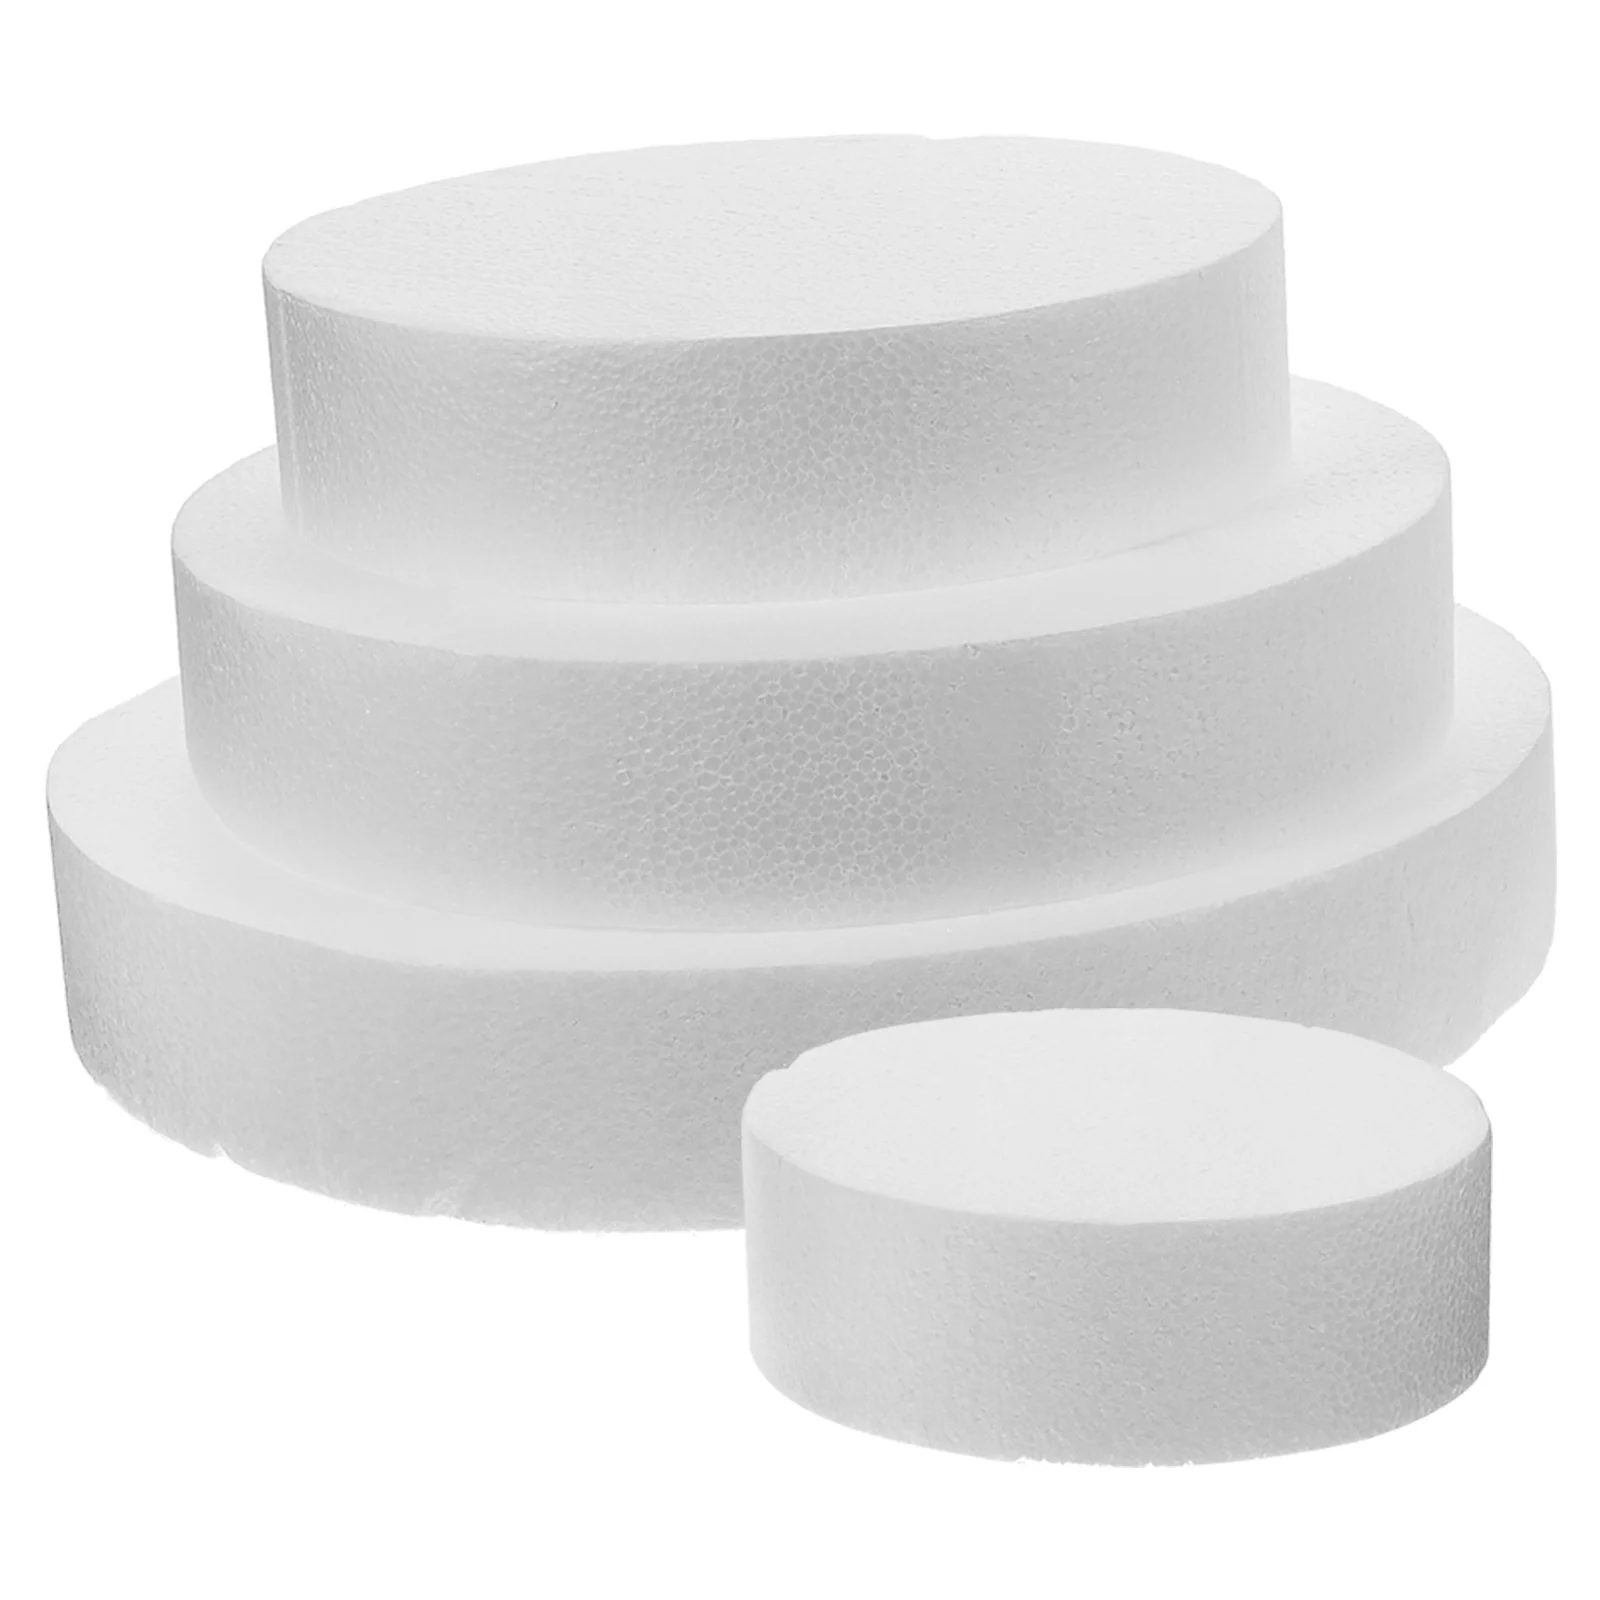 

Foams Cake Dummy Model Bakery Multi-layer Dummies DIY Mould Practice Prop Modelling White Craft Round Stand